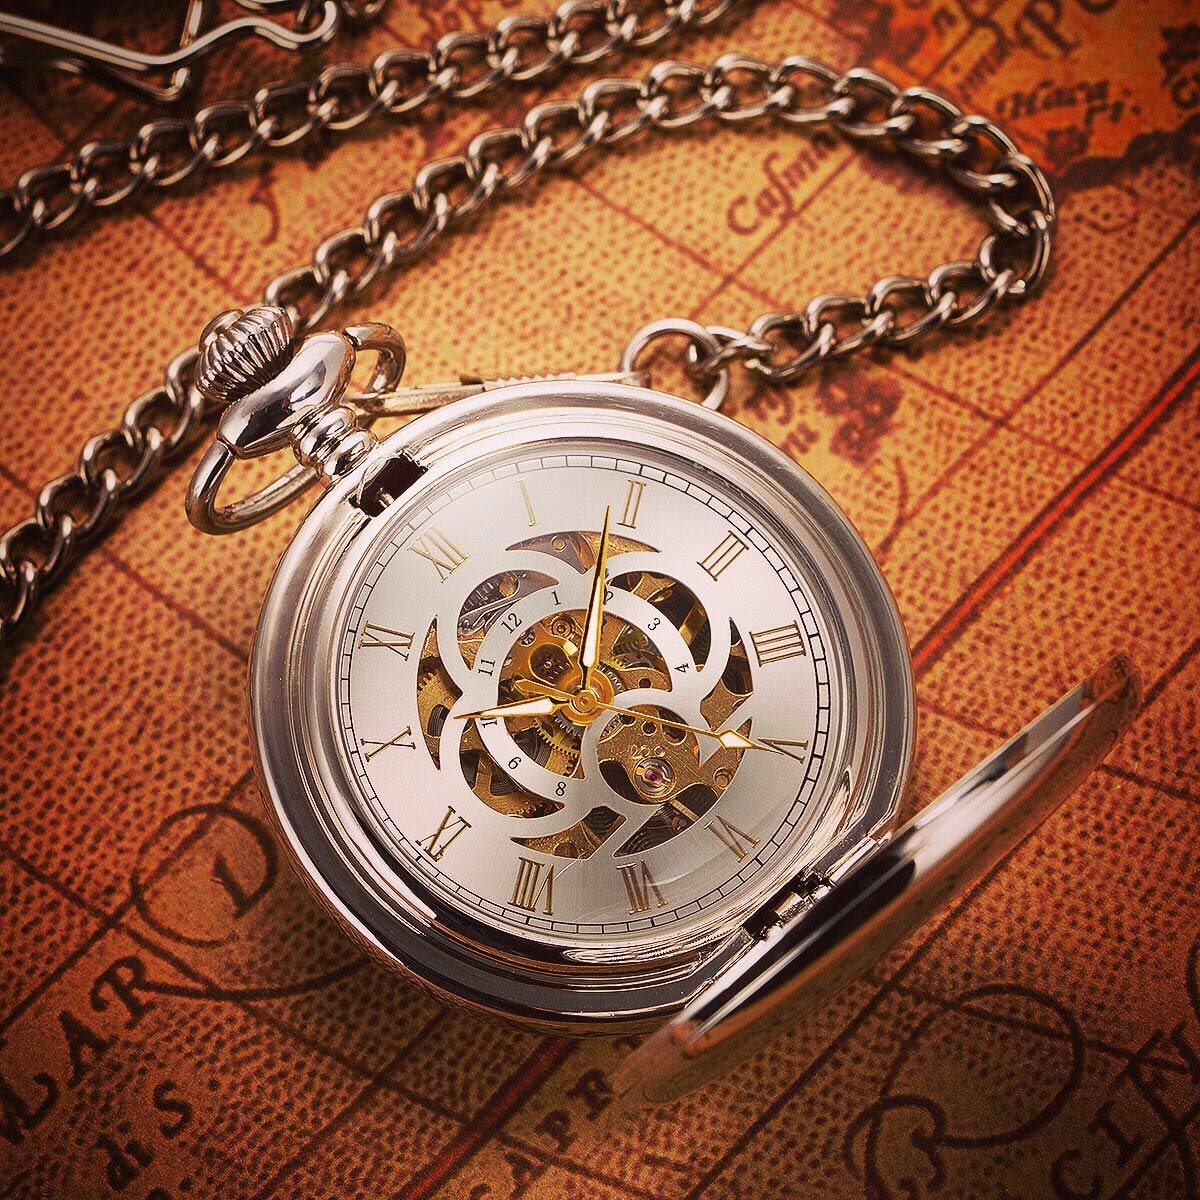 ManChDa Vintage Pocket Watch for Men Mechanical Pocket Watch with Chain Smooth Face Classic Pocket Watch